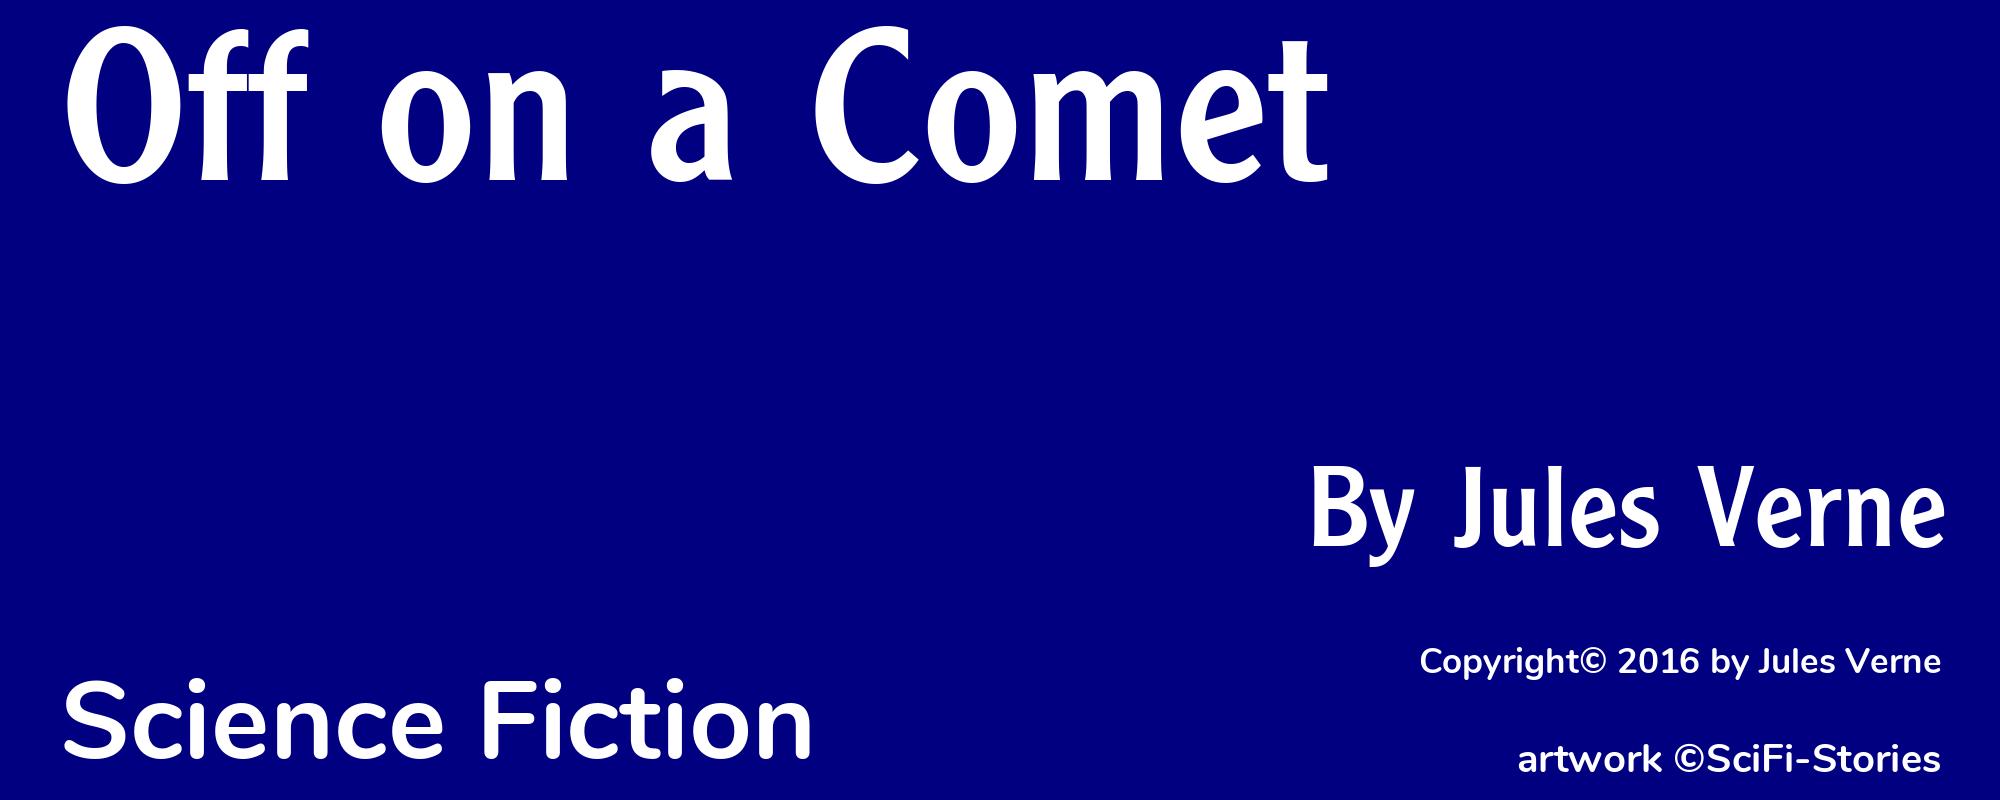 Off on a Comet - Cover